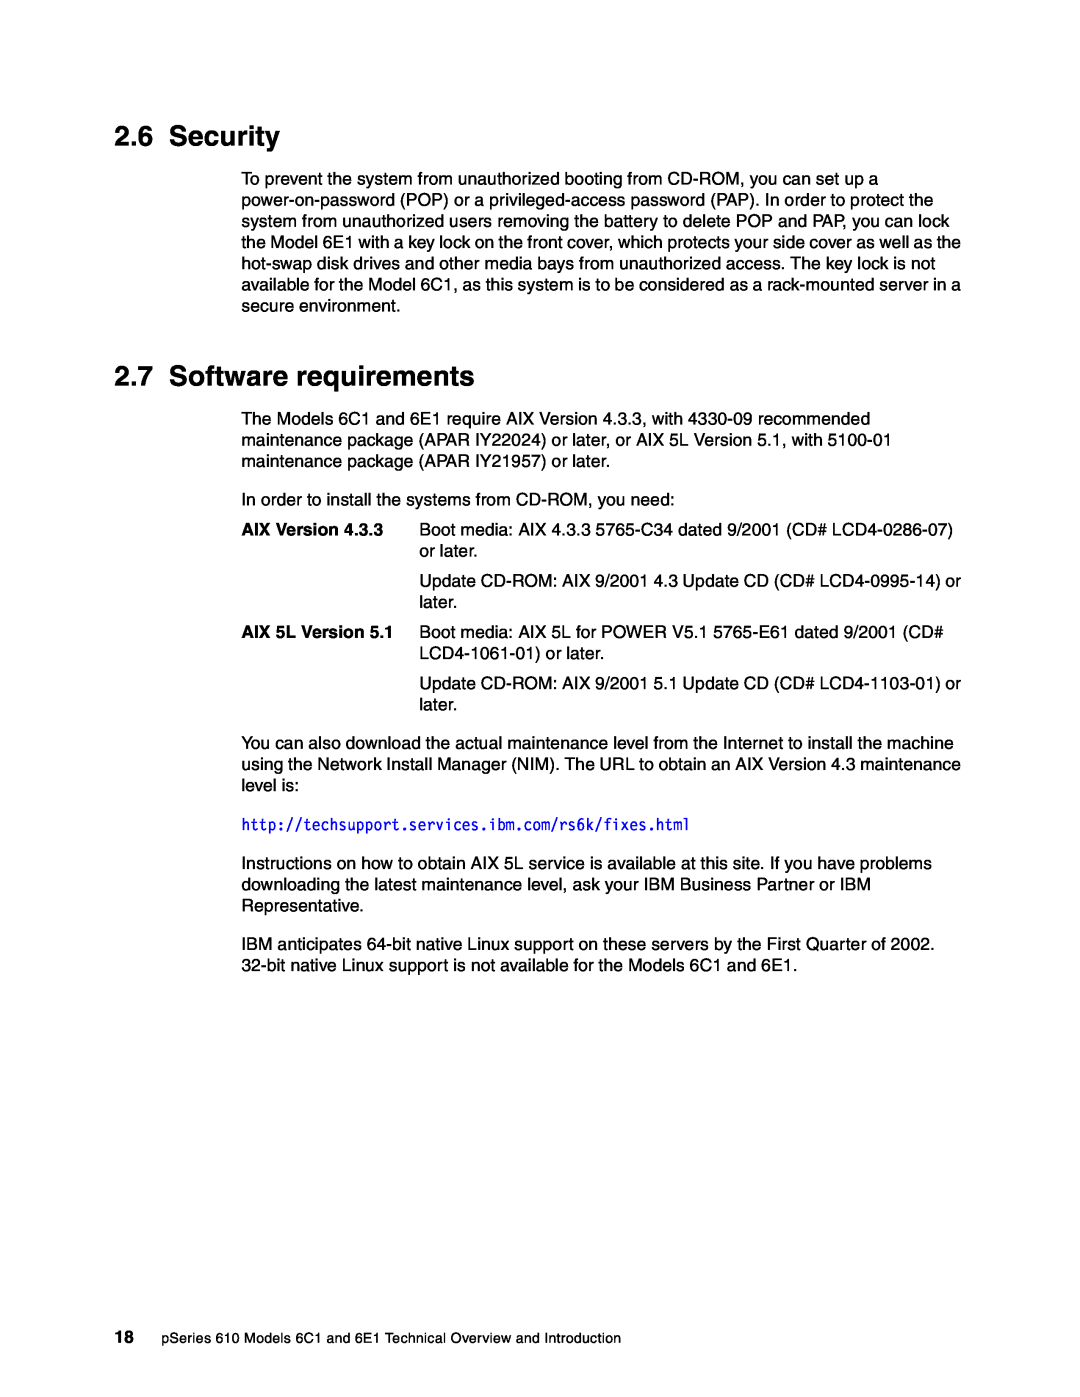 IBM 610, 6E1, 6C1 manual Security, Software requirements 